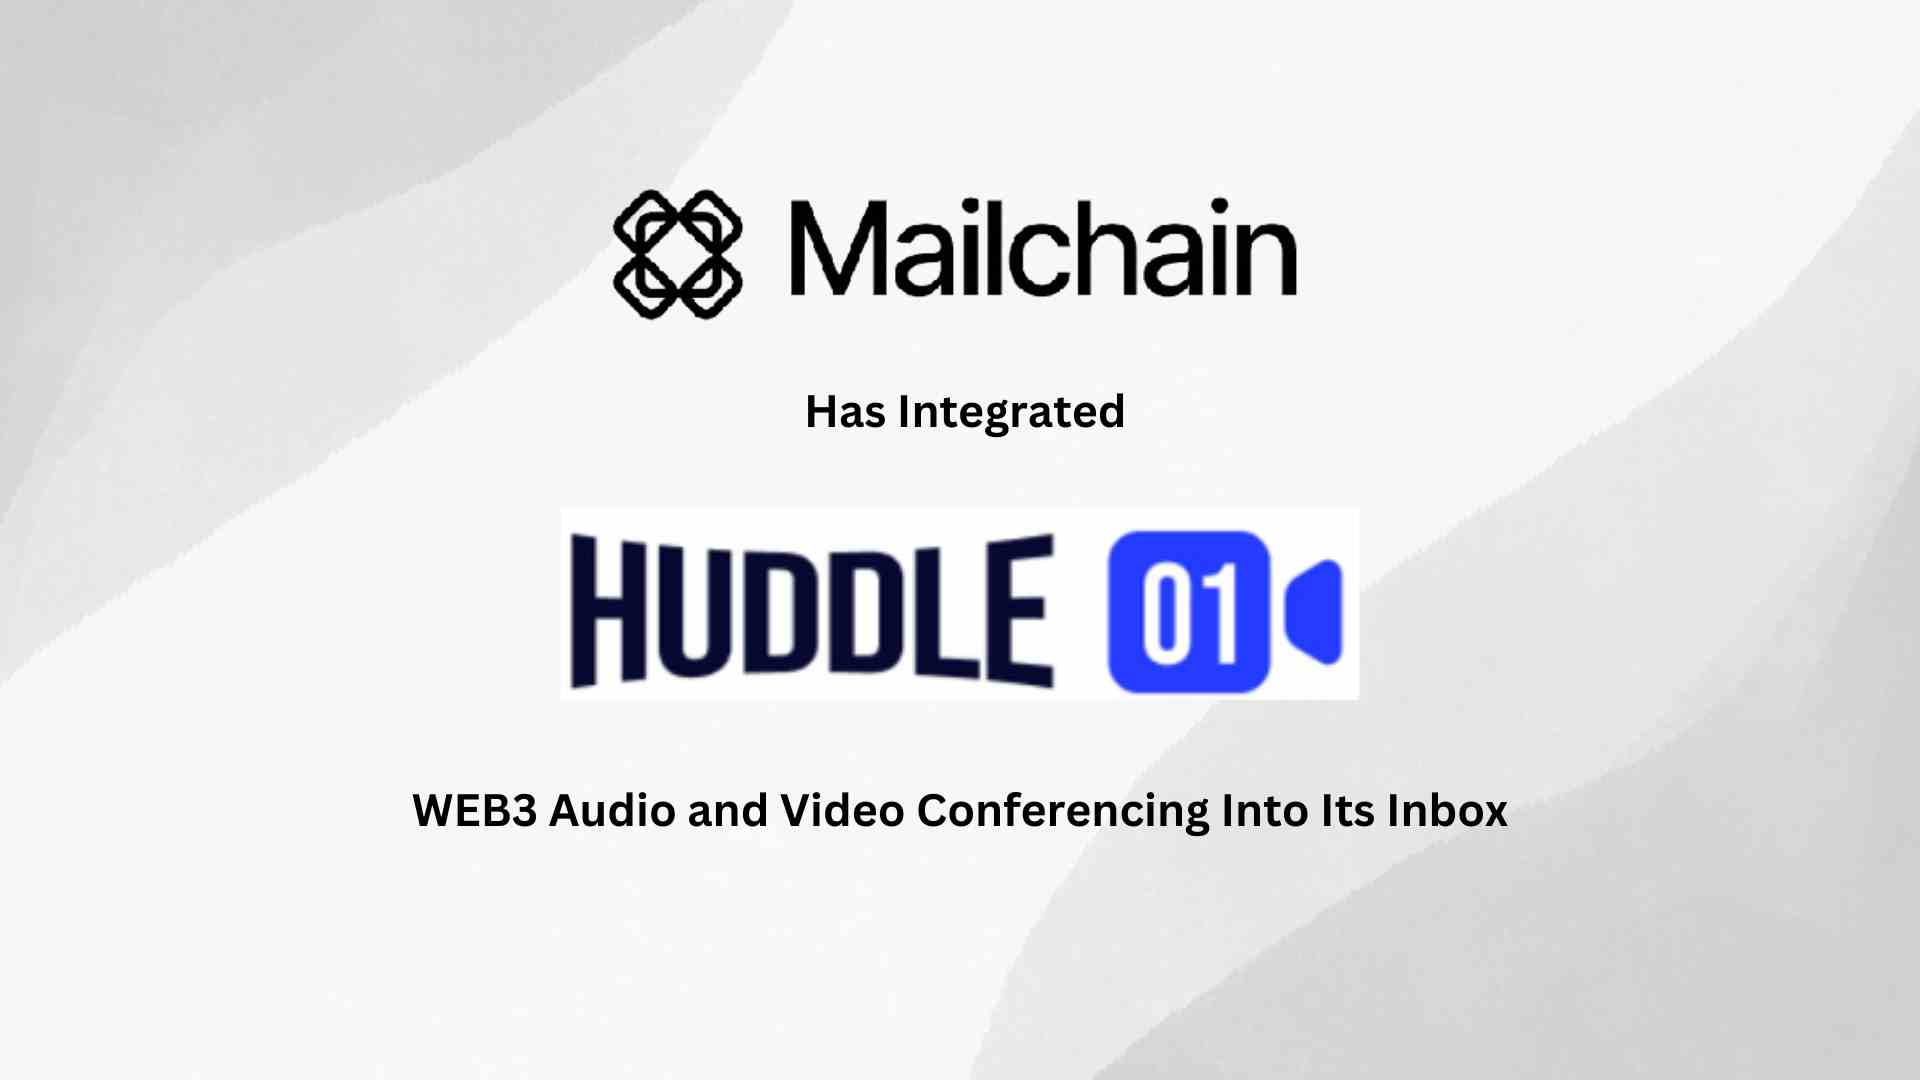 Mailchain Integrates Huddle01 to Offer Seamless Web3 Video Conferencing and Multi-Chain Communication with Web3 Identities